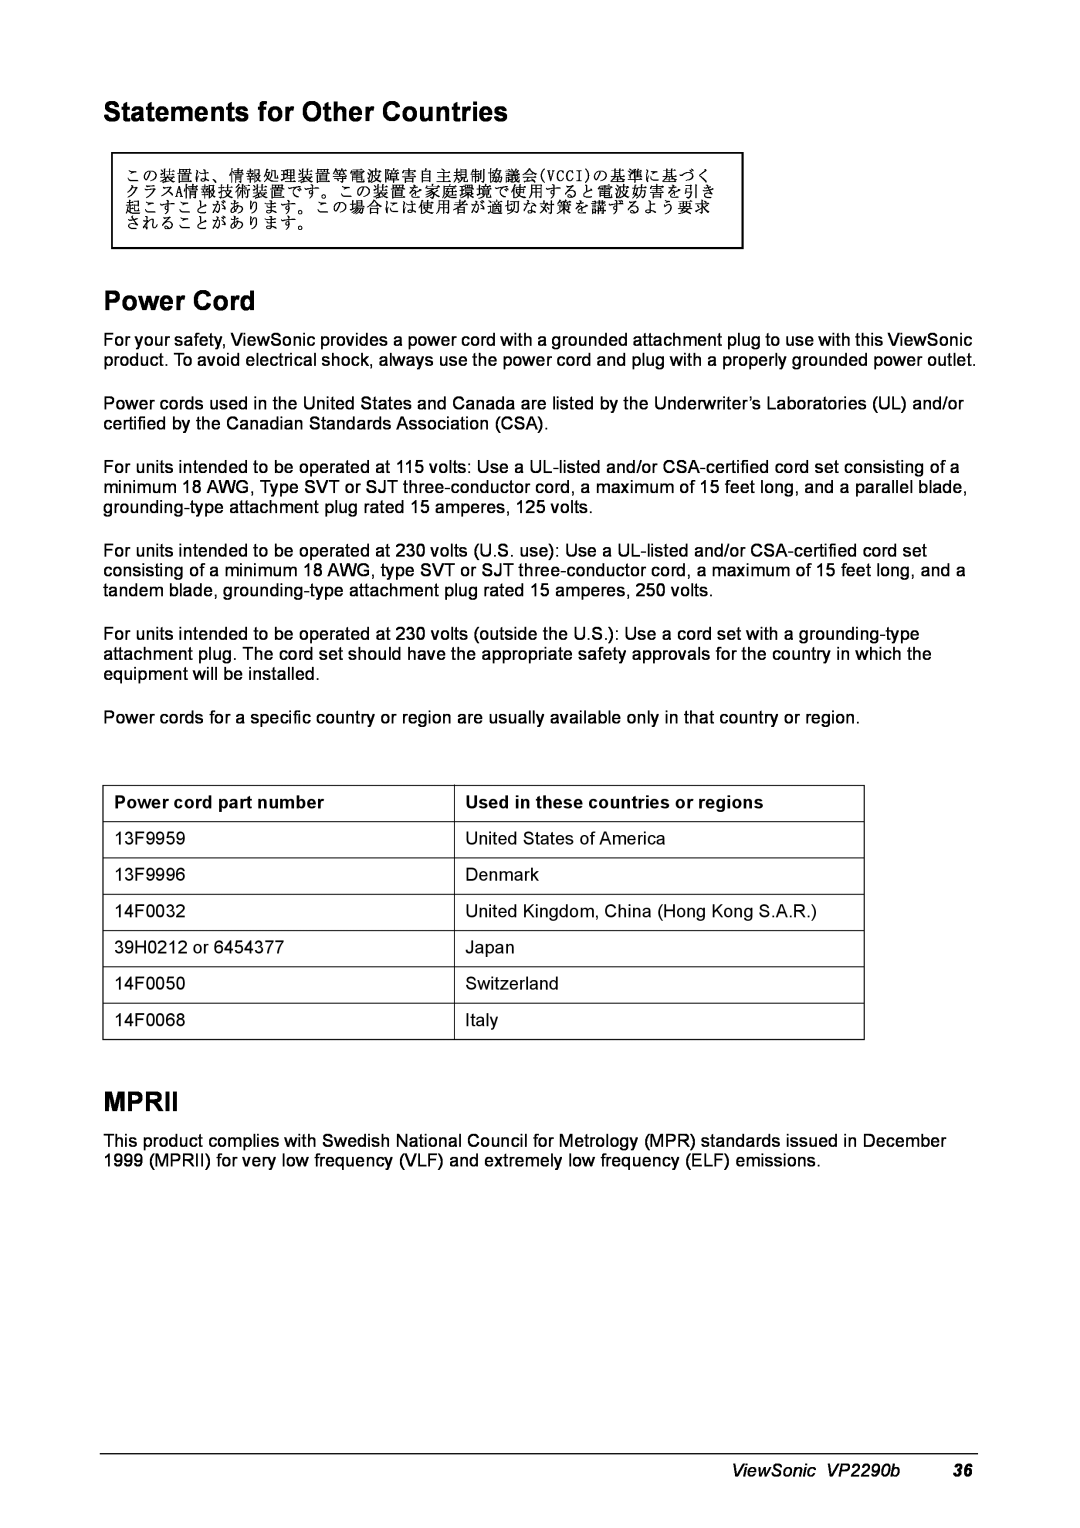 ViewSonic VP2290B manual Statements for Other Countries Power Cord, Mprii, Power cord part number, ViewSonic VP2290b 